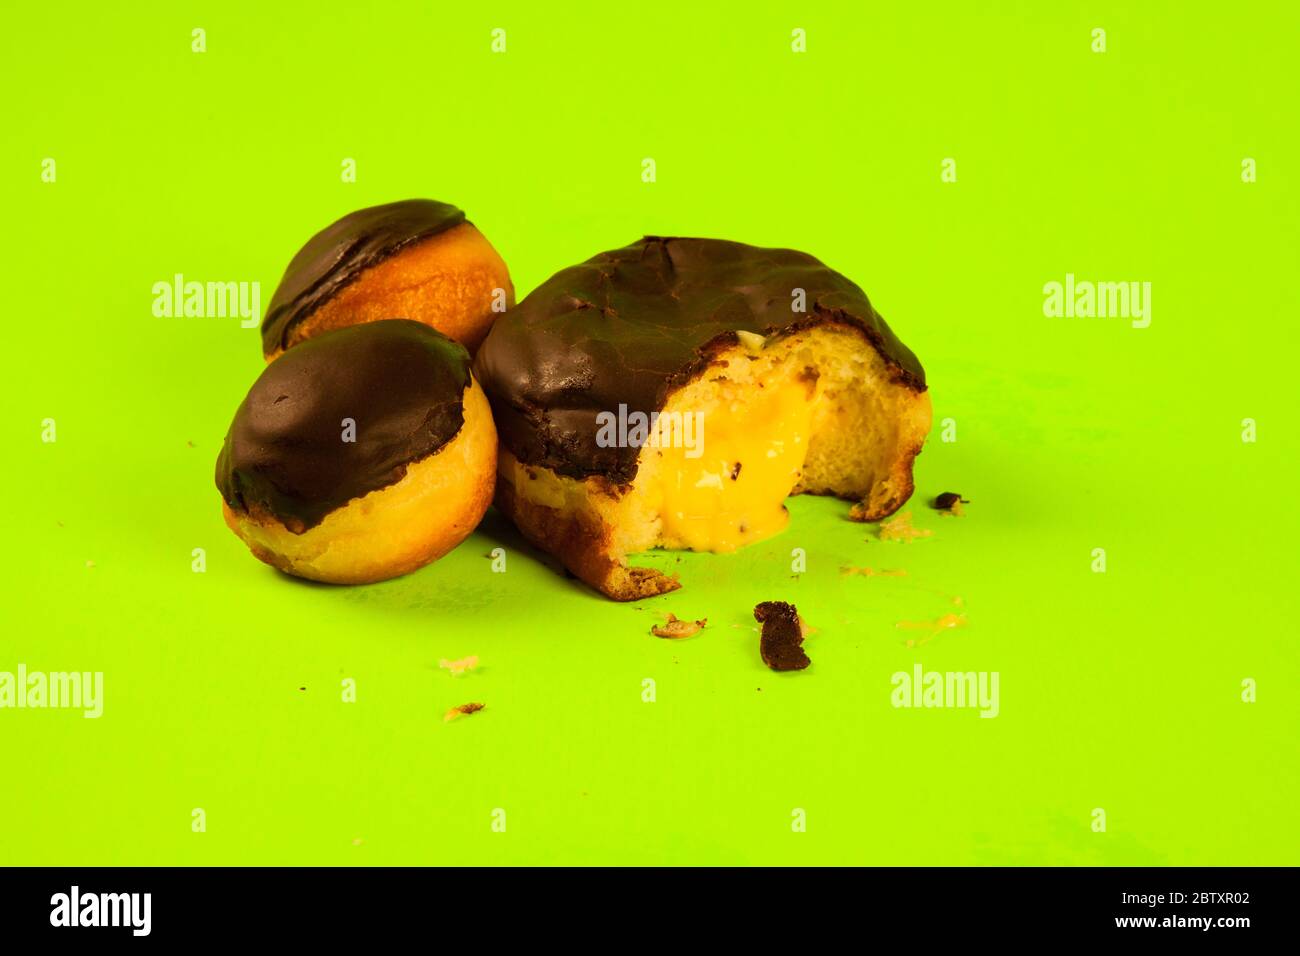 Boston cream donut large and small on green background oosing with custard Stock Photo